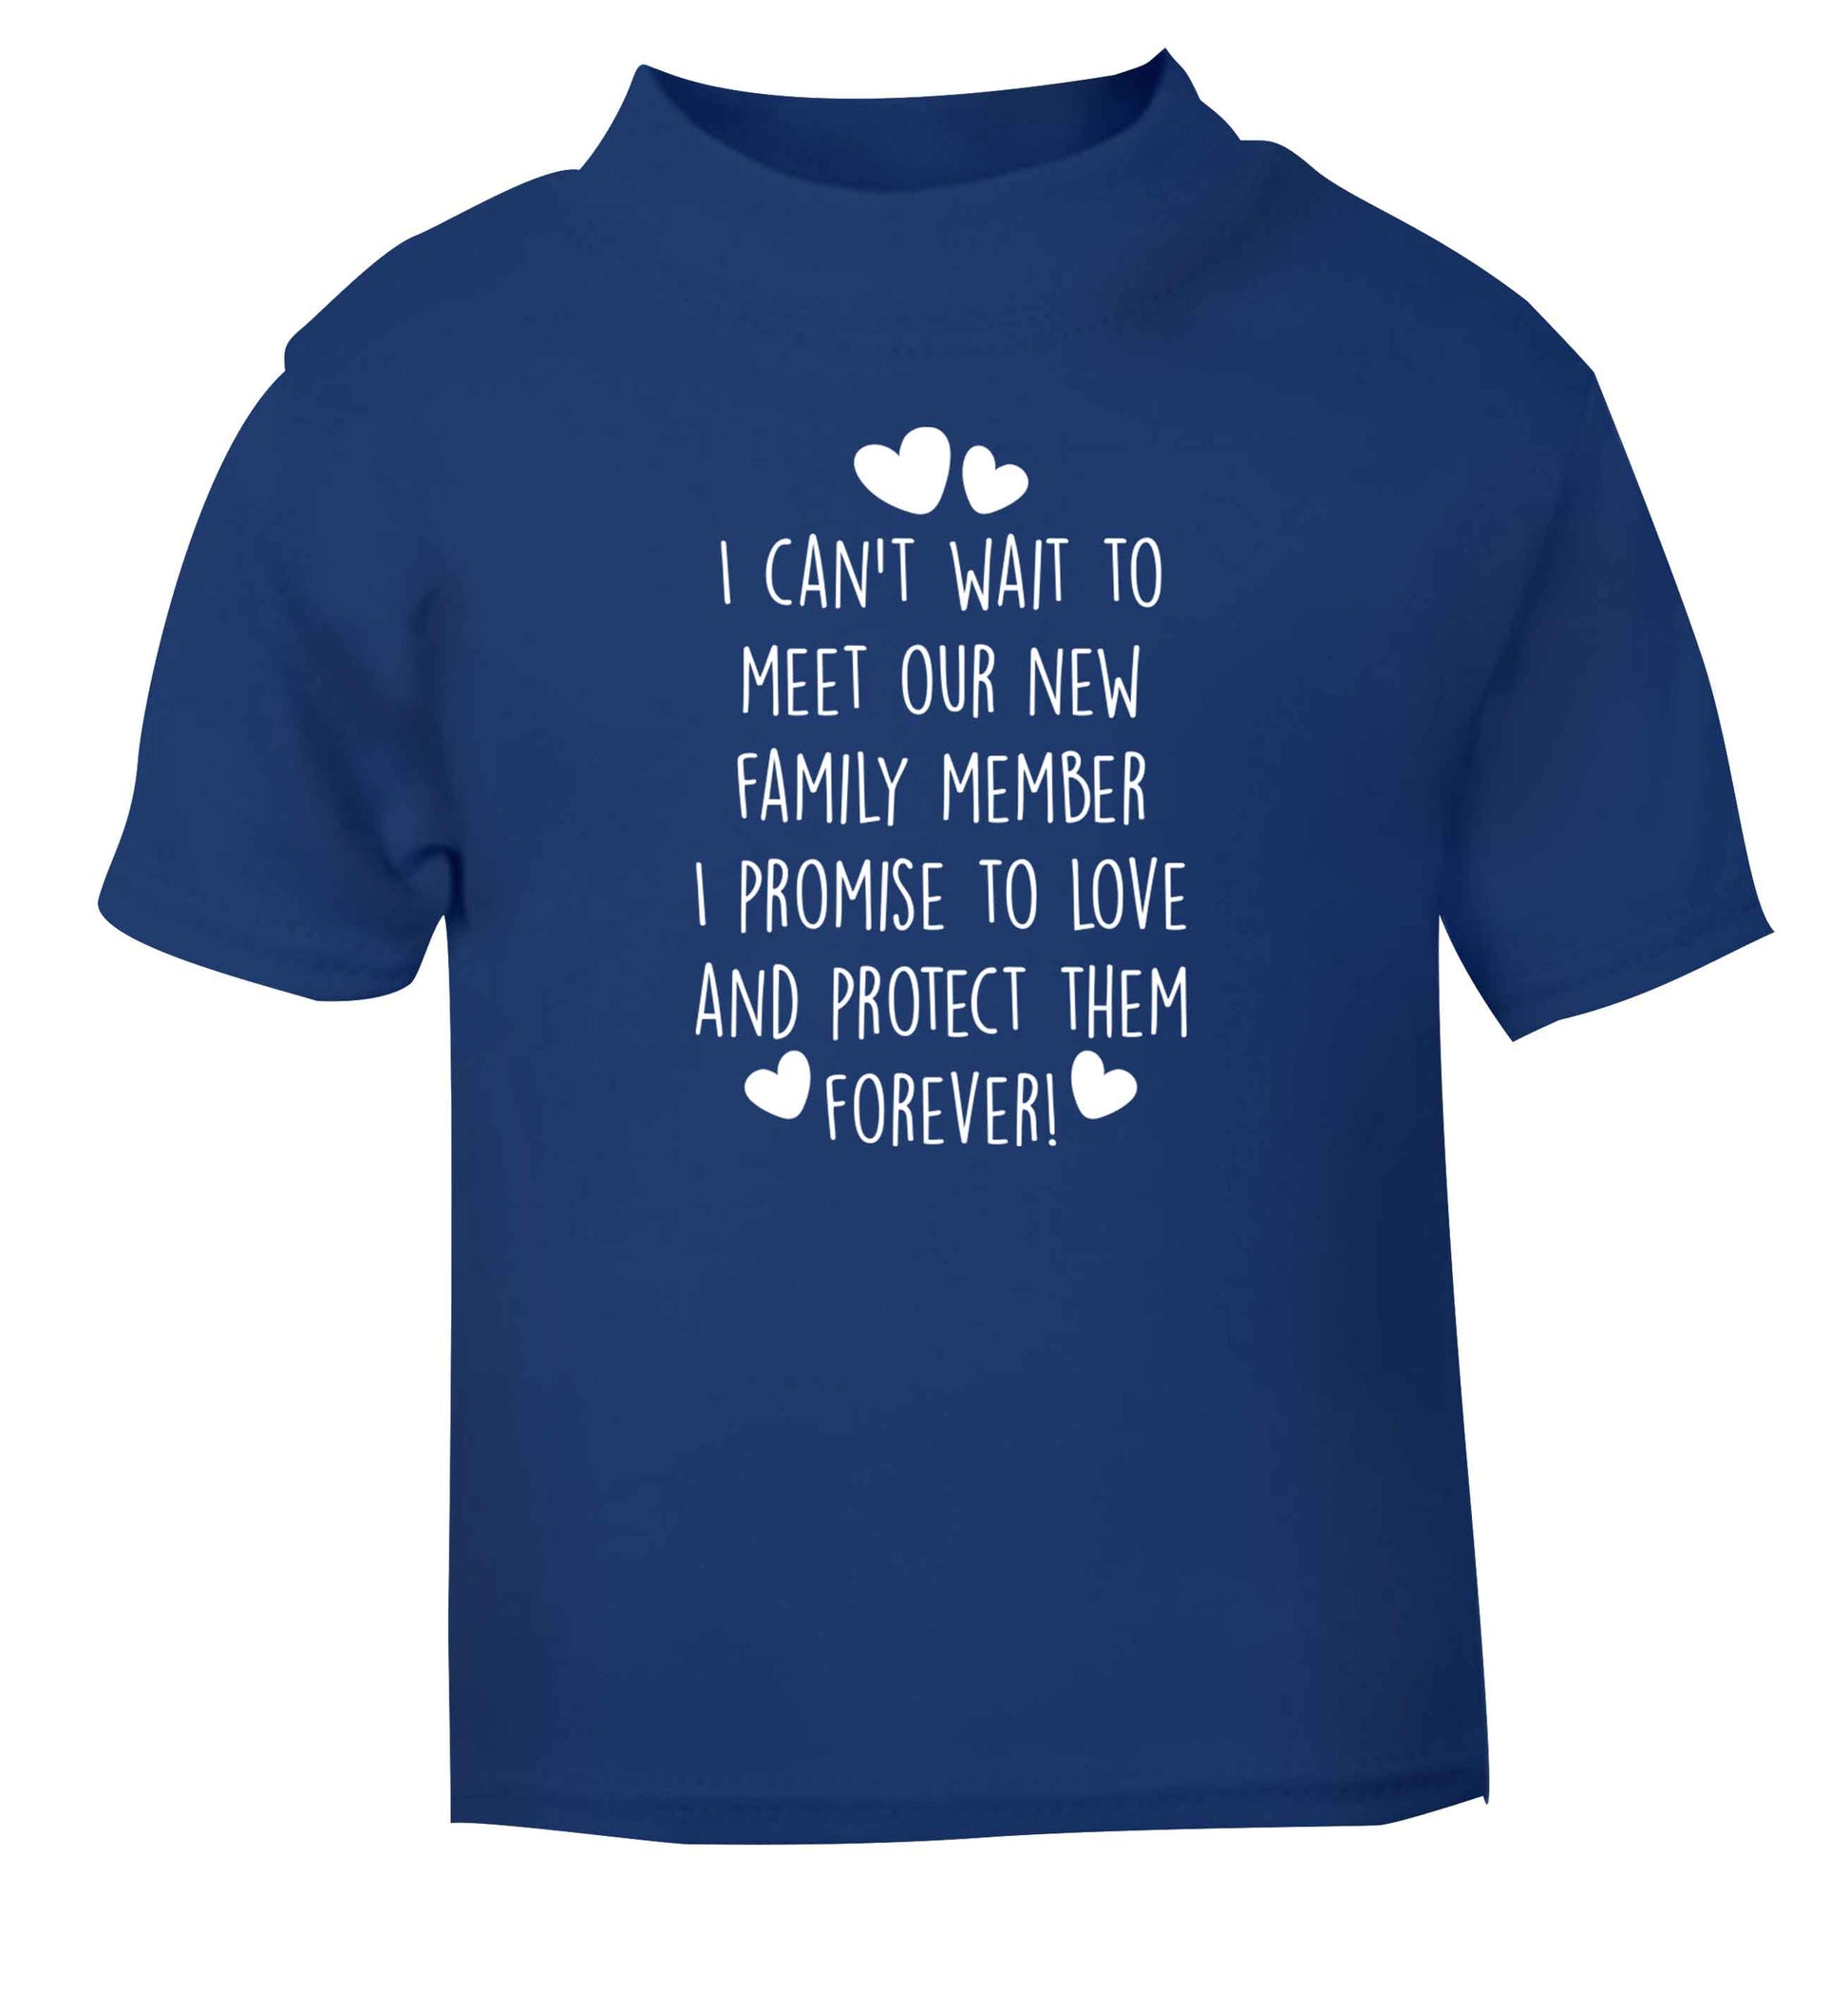 I can't wait to meet our new family member I promise to love and protect them foreverblue Baby Toddler Tshirt 2 Years